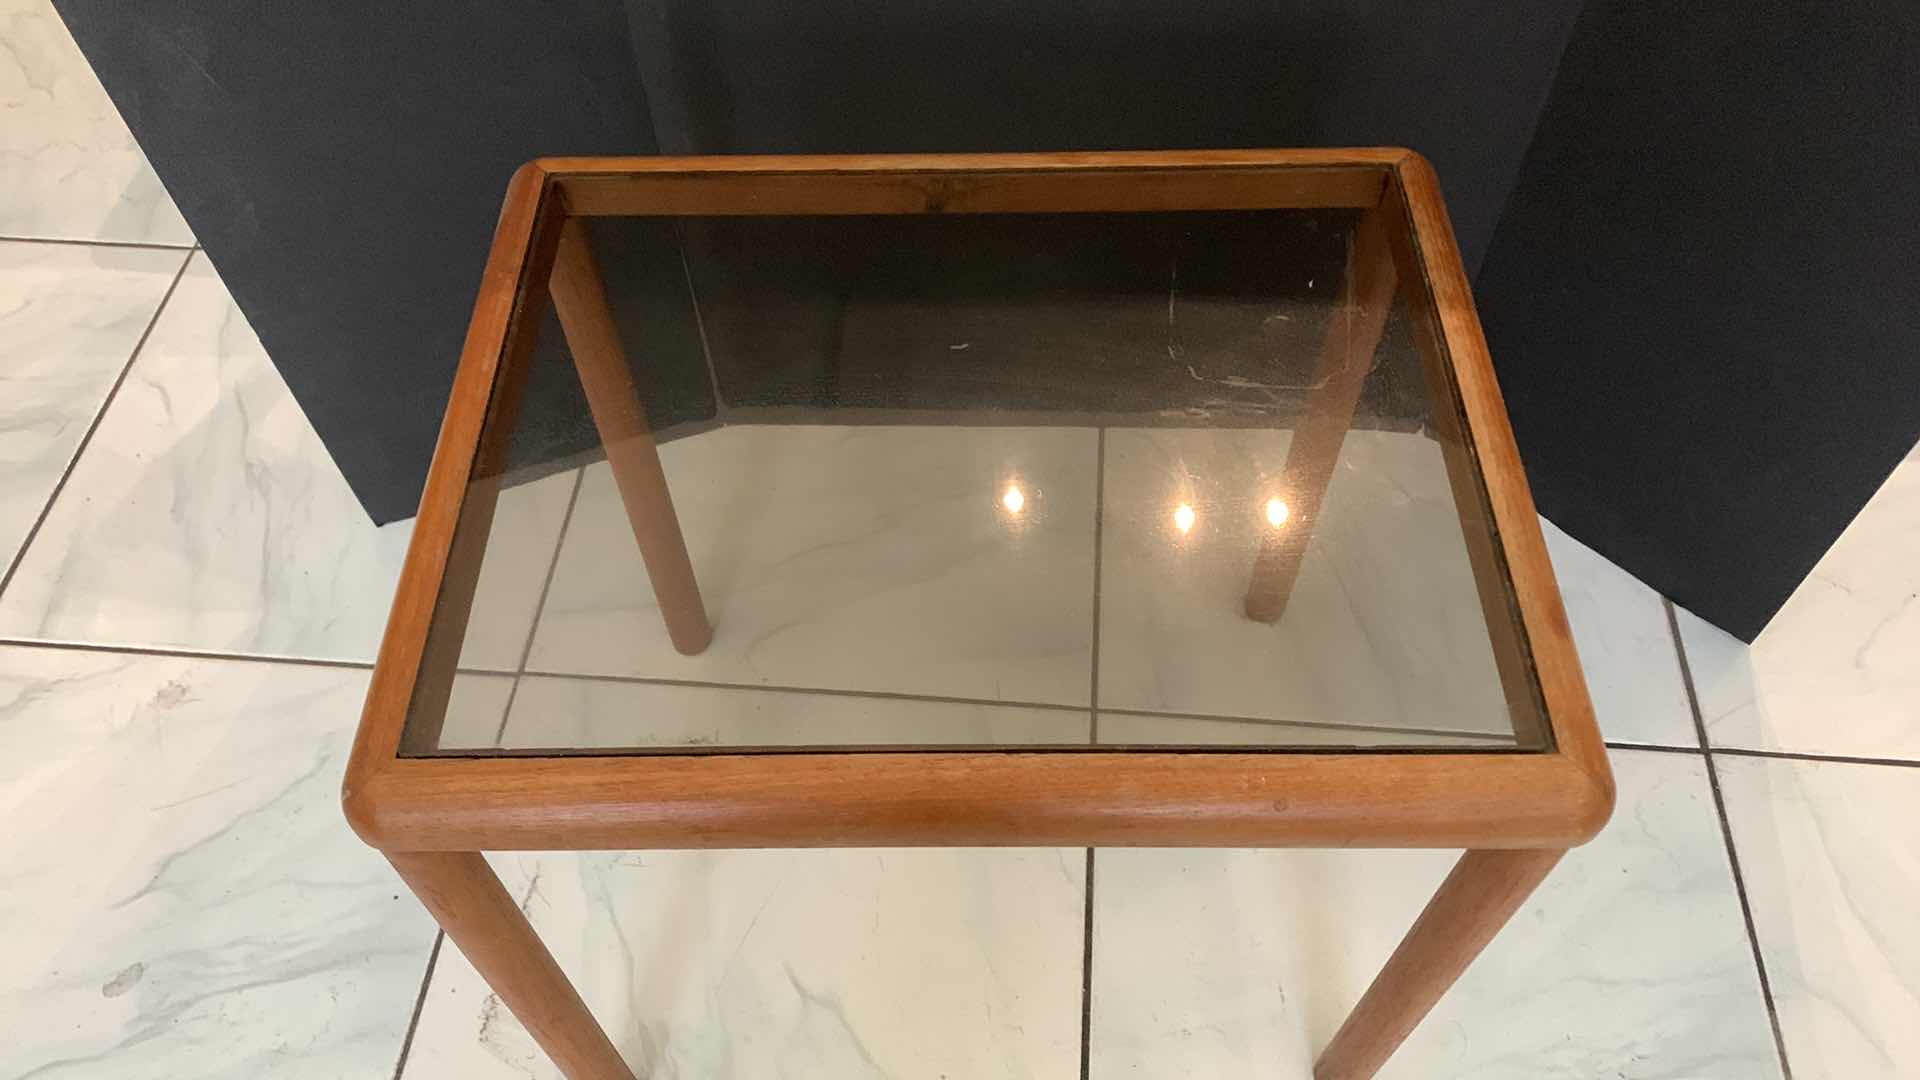 Photo 3 of WOOD W GLASS TOP SMALL END TABLE 20” x 16” x H18.5”